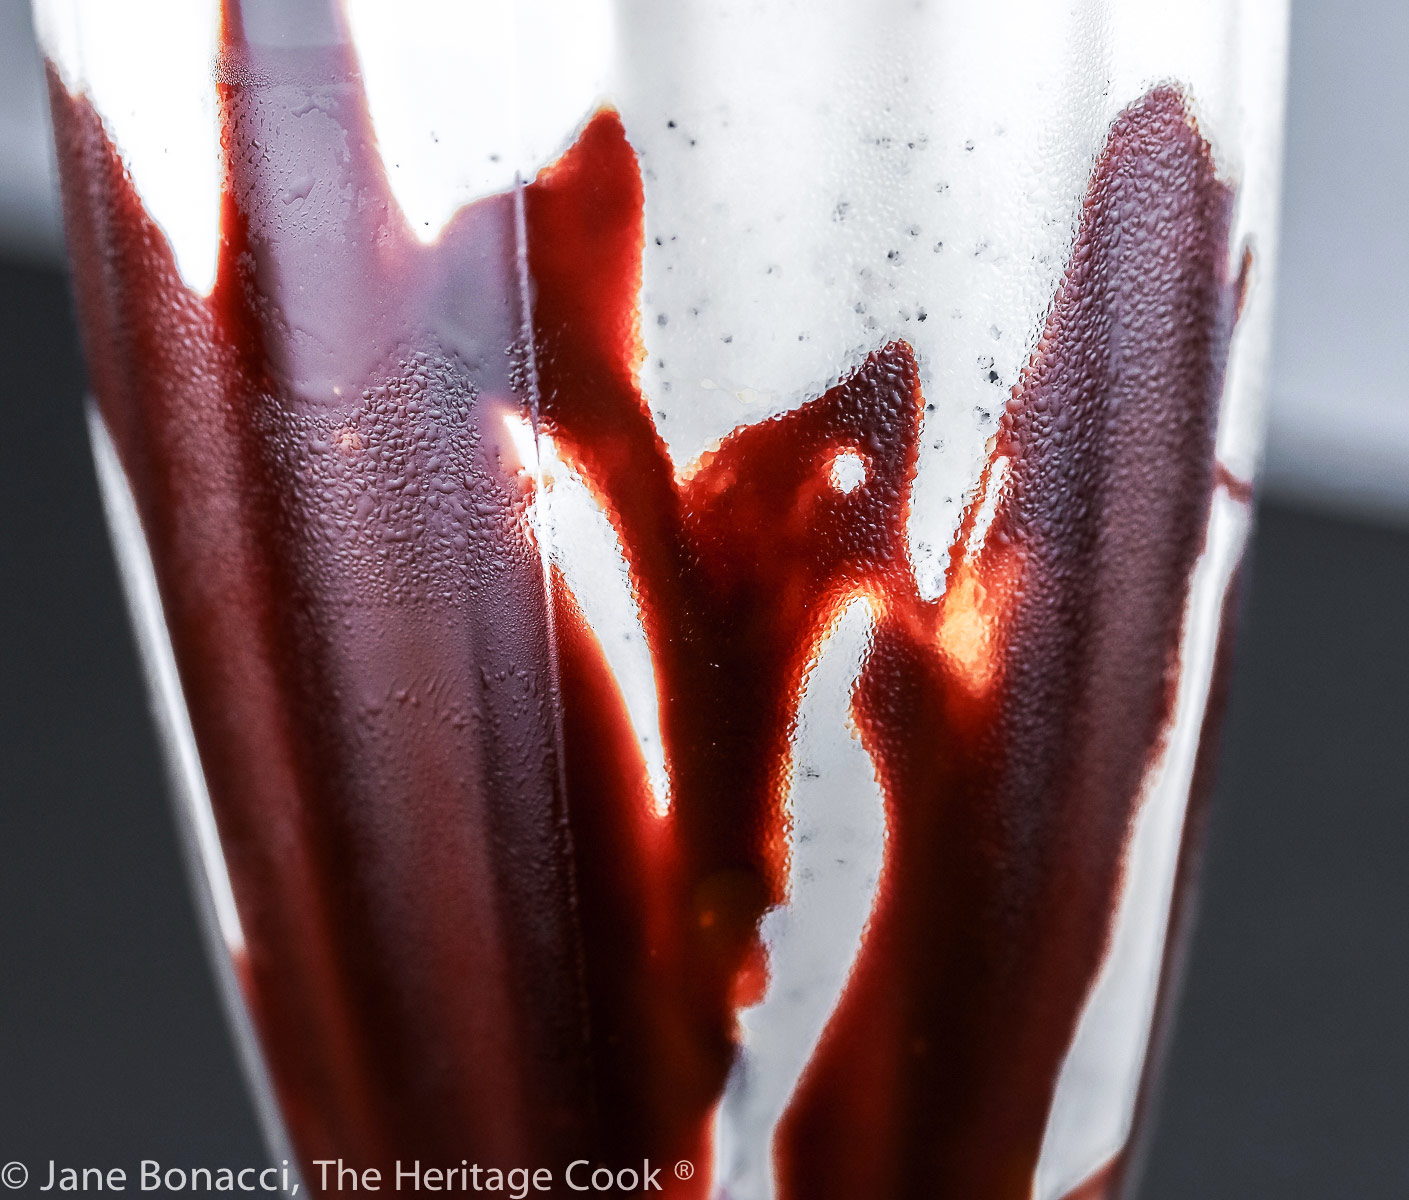 A hummingbird eating at a feeder appeared in the abstract chocolate swirl in the glass! 